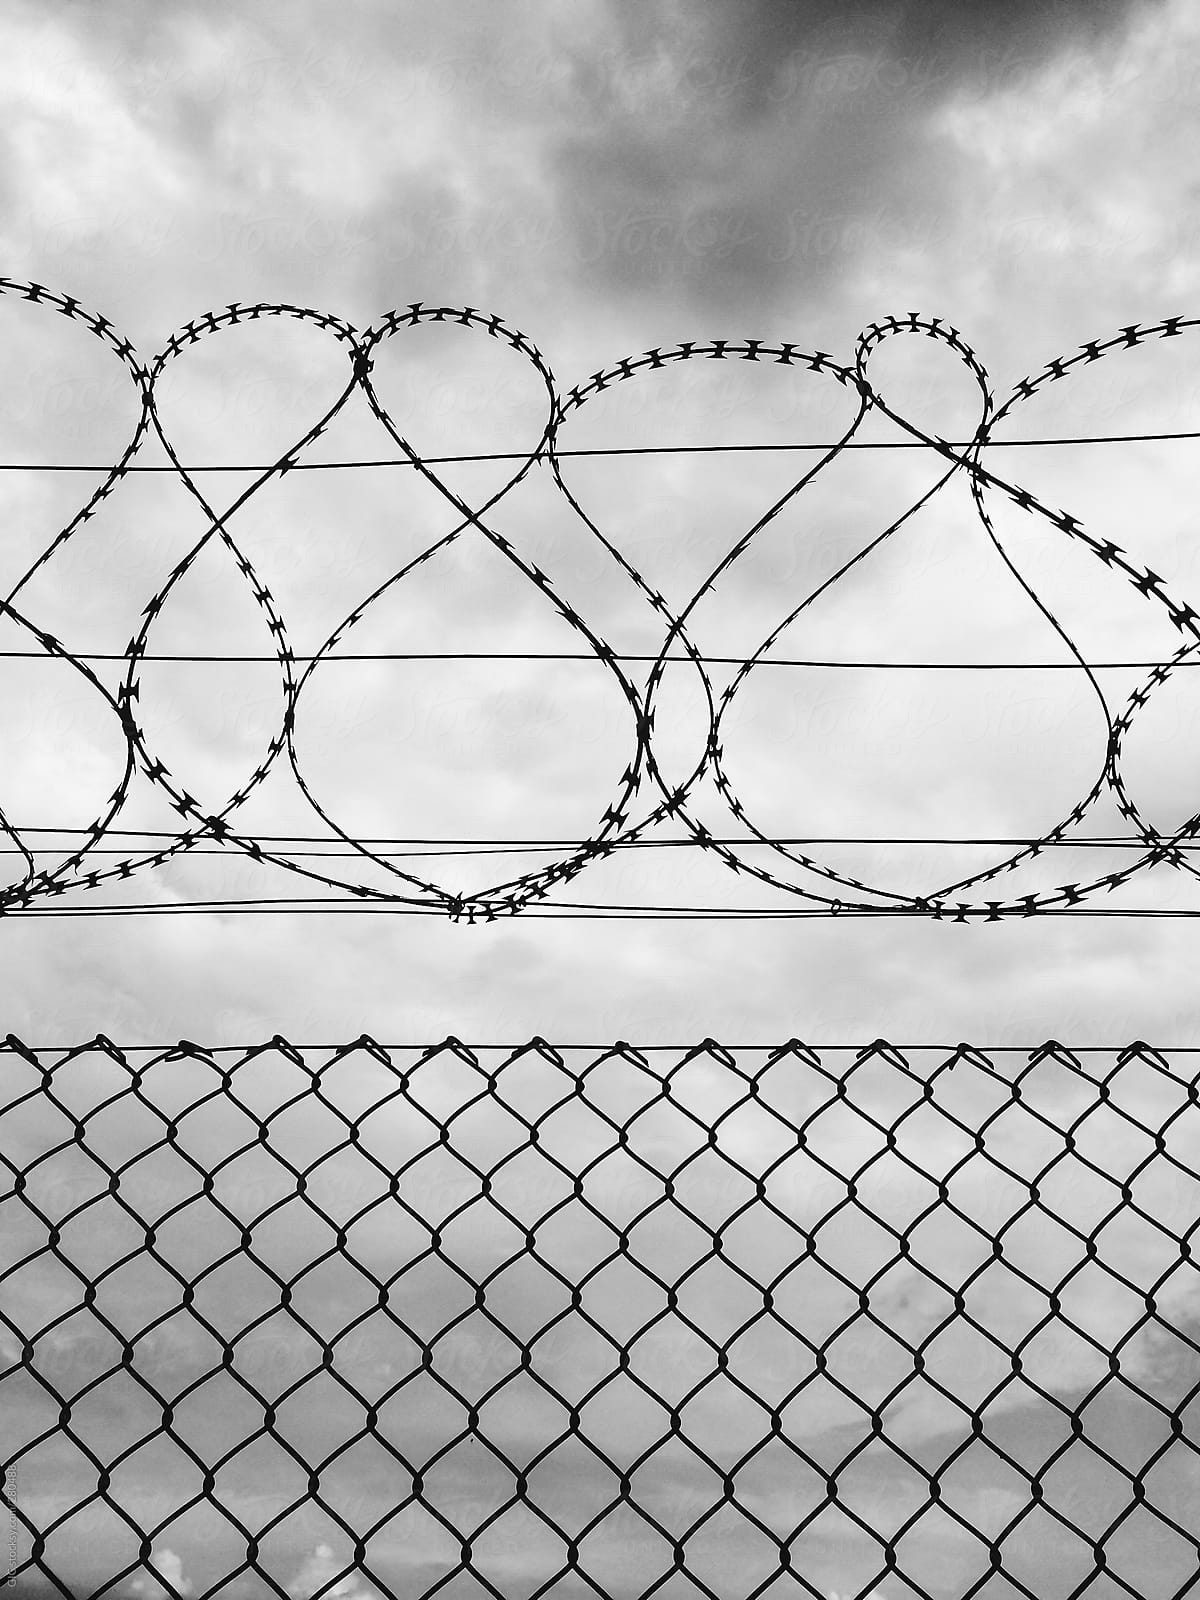 Barbed wire at airport